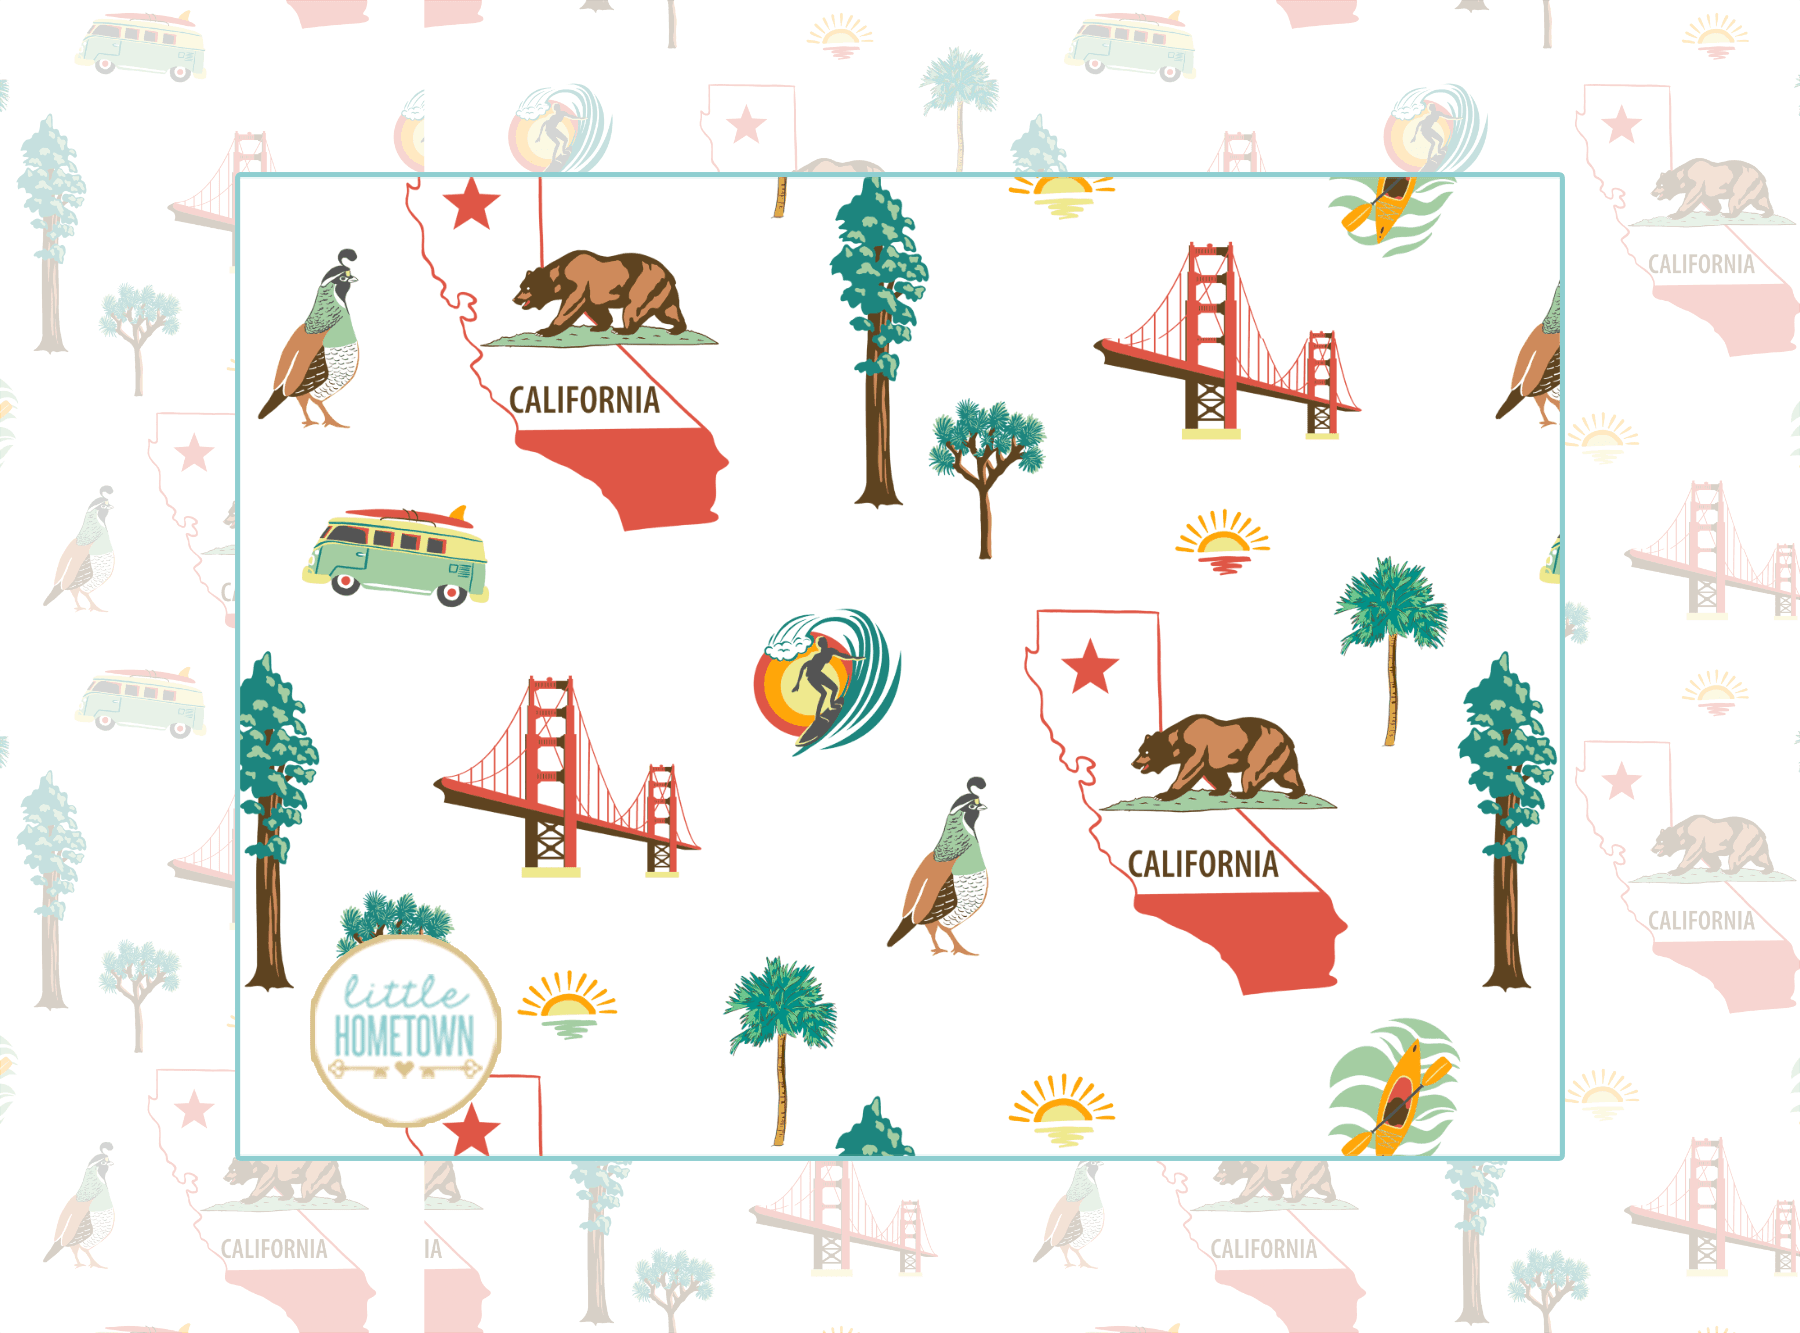 Colorful California-themed plush throw blanket featuring iconic landmarks and symbols, measuring 60x80 inches.